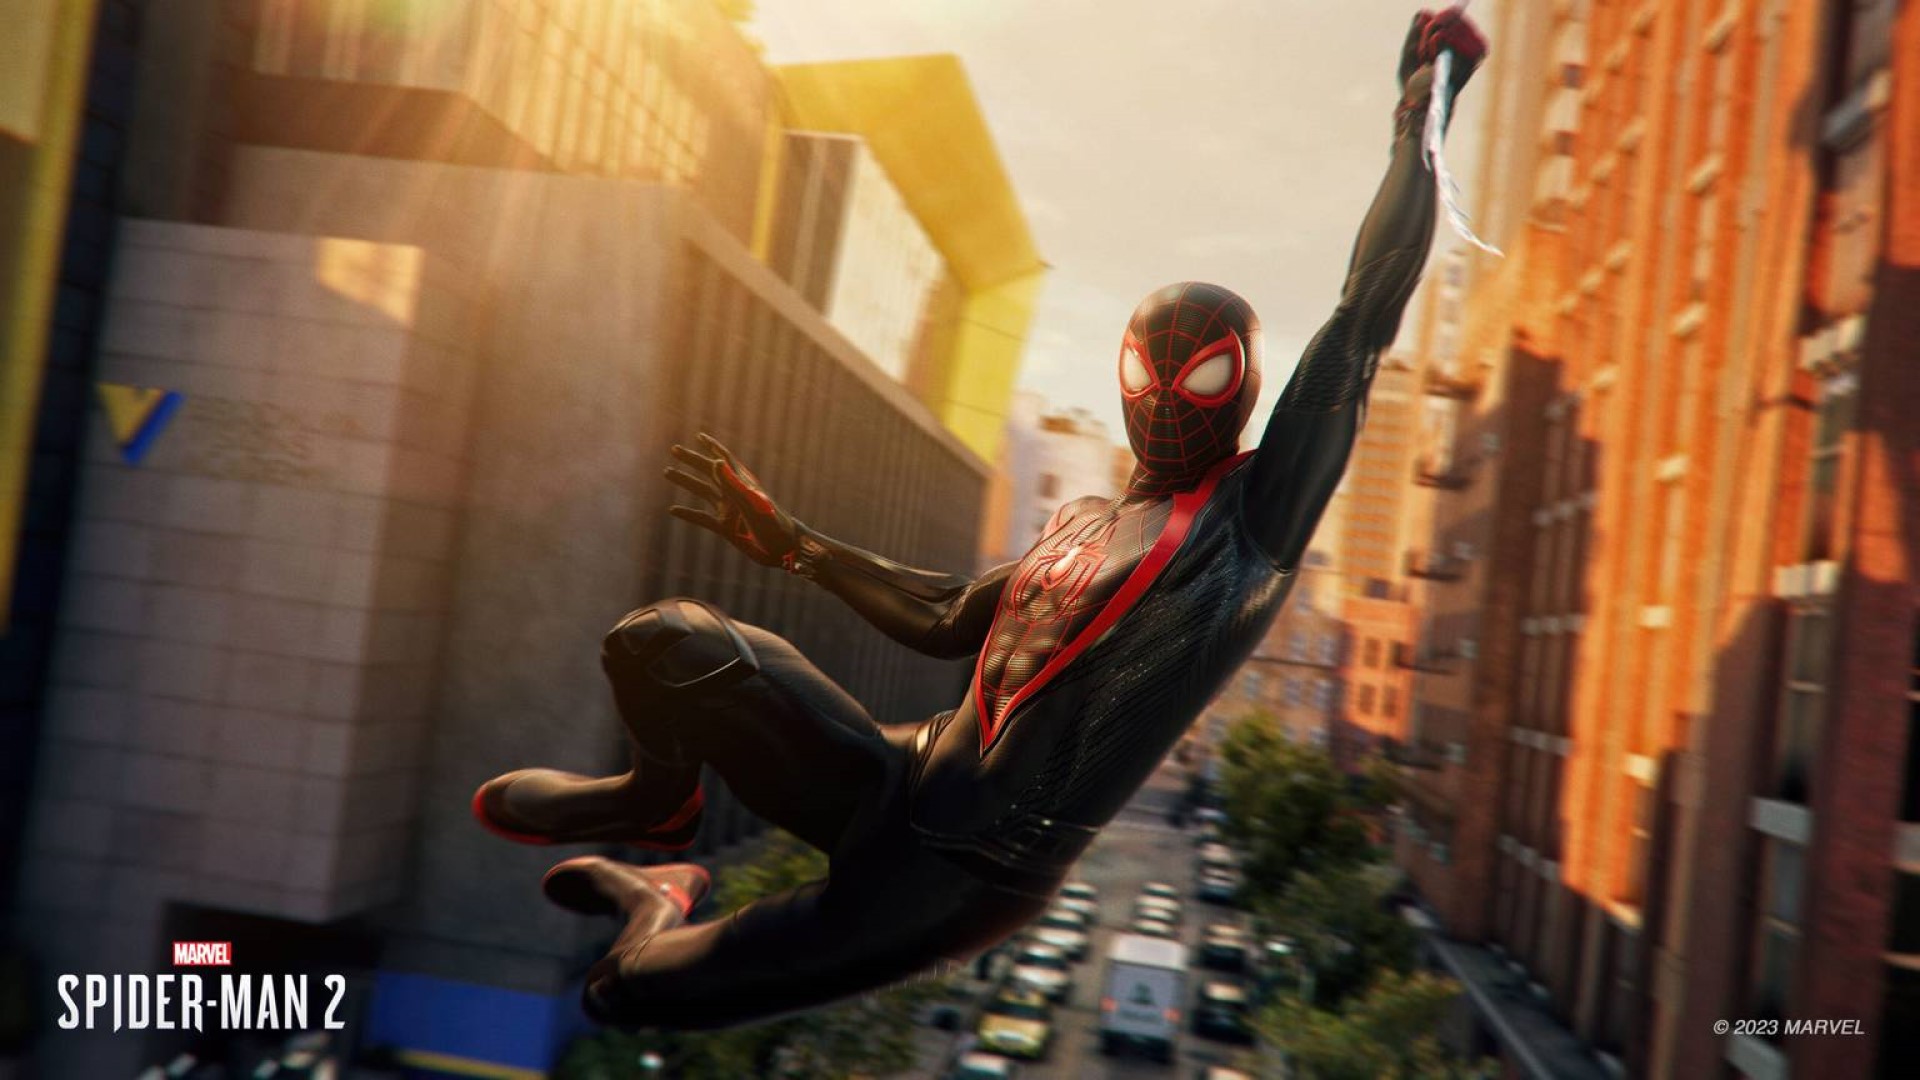 Marvel’s Spider-Man 2 is Natively Mixed in Dolby Atmos